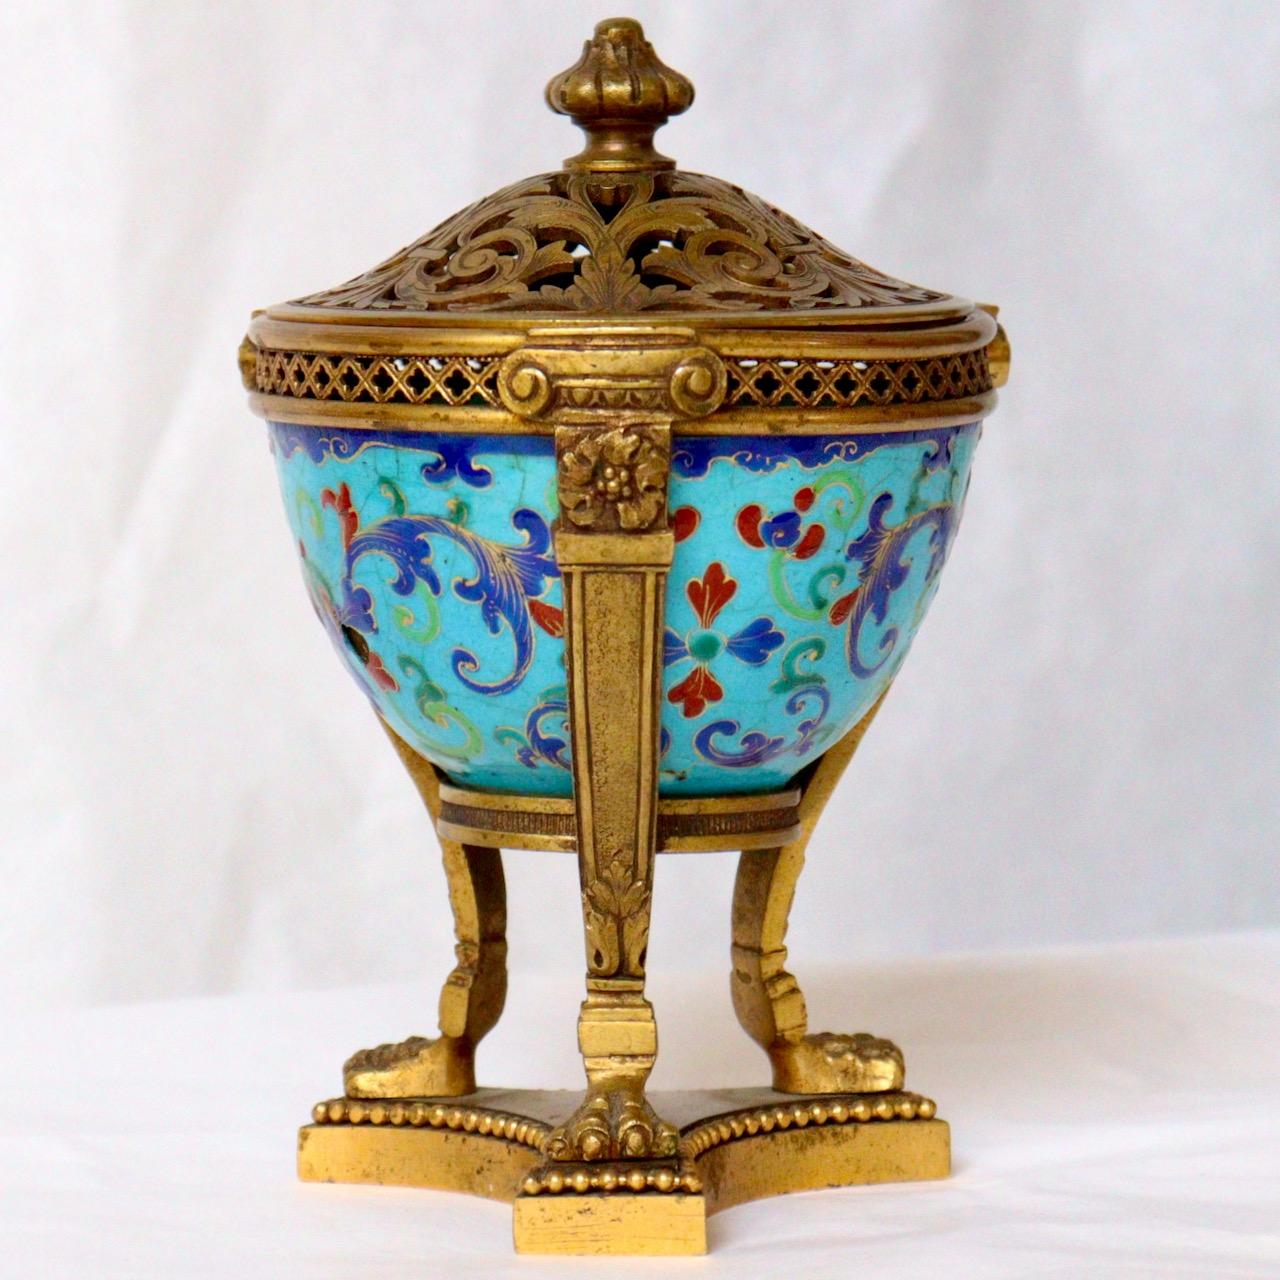 A French 19th century perfume or pot pourri vase 
A hand-painted polychromed enamel on copper Chinese Export bowl designed with flowers and rinceaux, ormolu-mounted as an Athénienne used as Pot Pourri. Rest-ing on three claw feet, the Arabesque